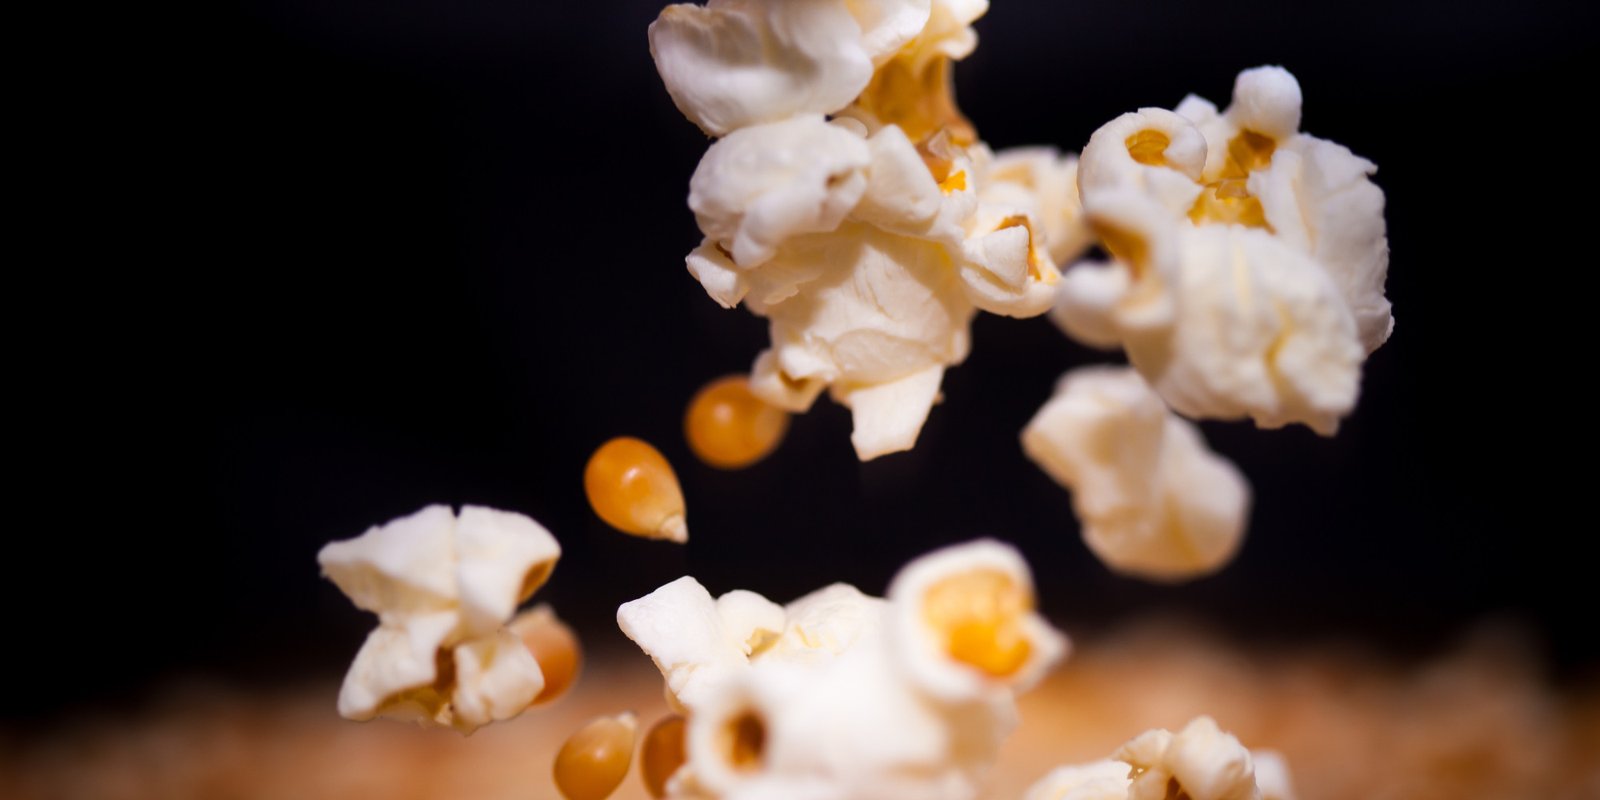 Popcorn is a special type of corn that "pops" when exposed to heat - Serious Facts